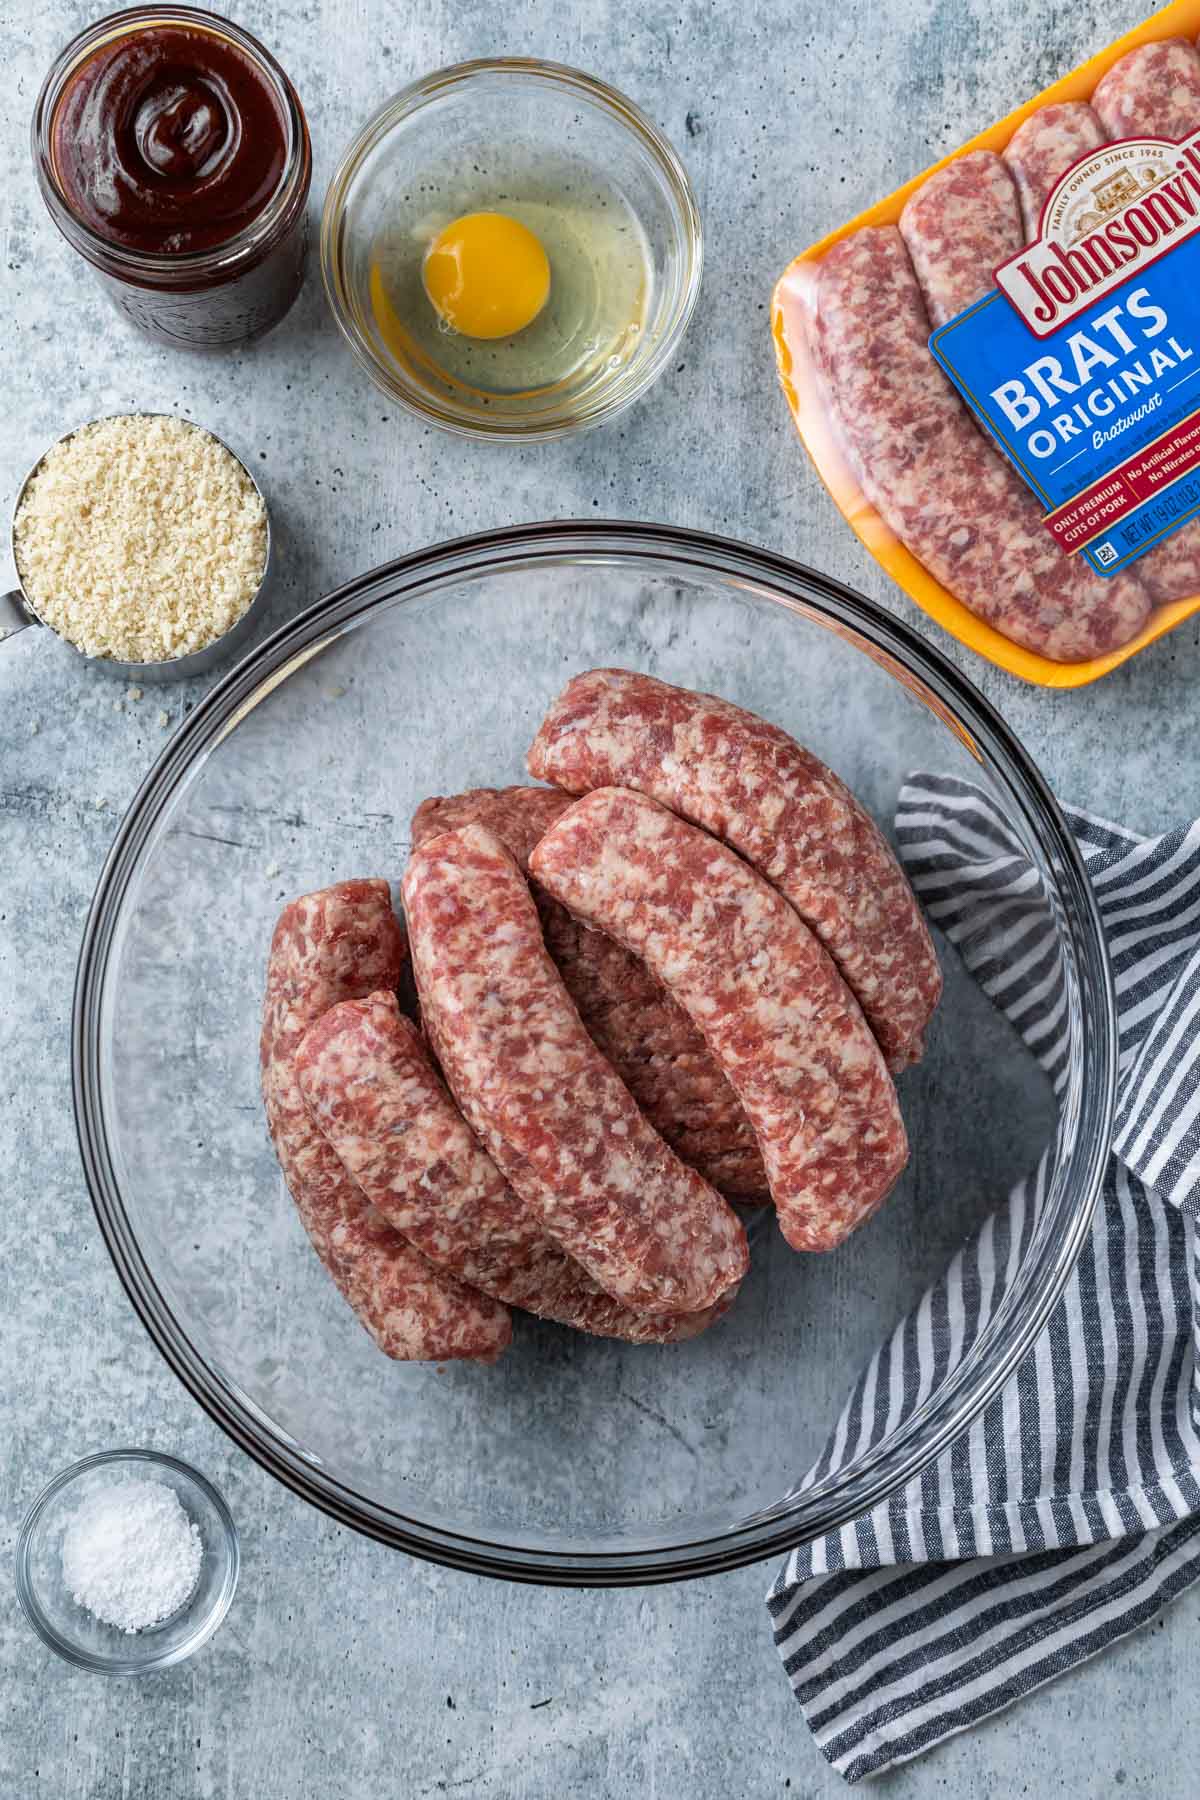 ingredients for cocktail meatball recipe using Johnsonville brats